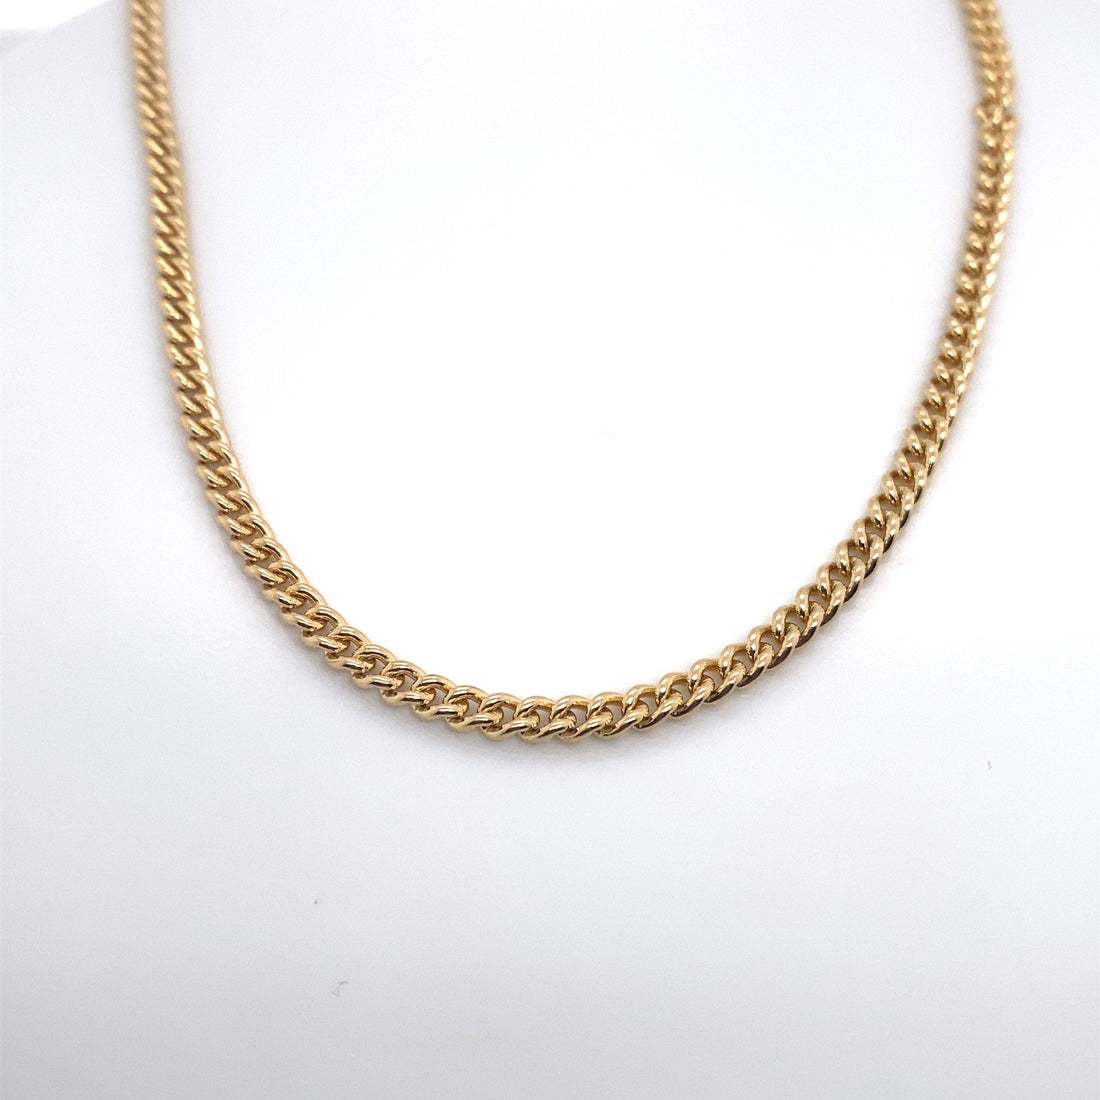 10K YELLOW GOLD CURB HEAVY CHAIN - Appelt&